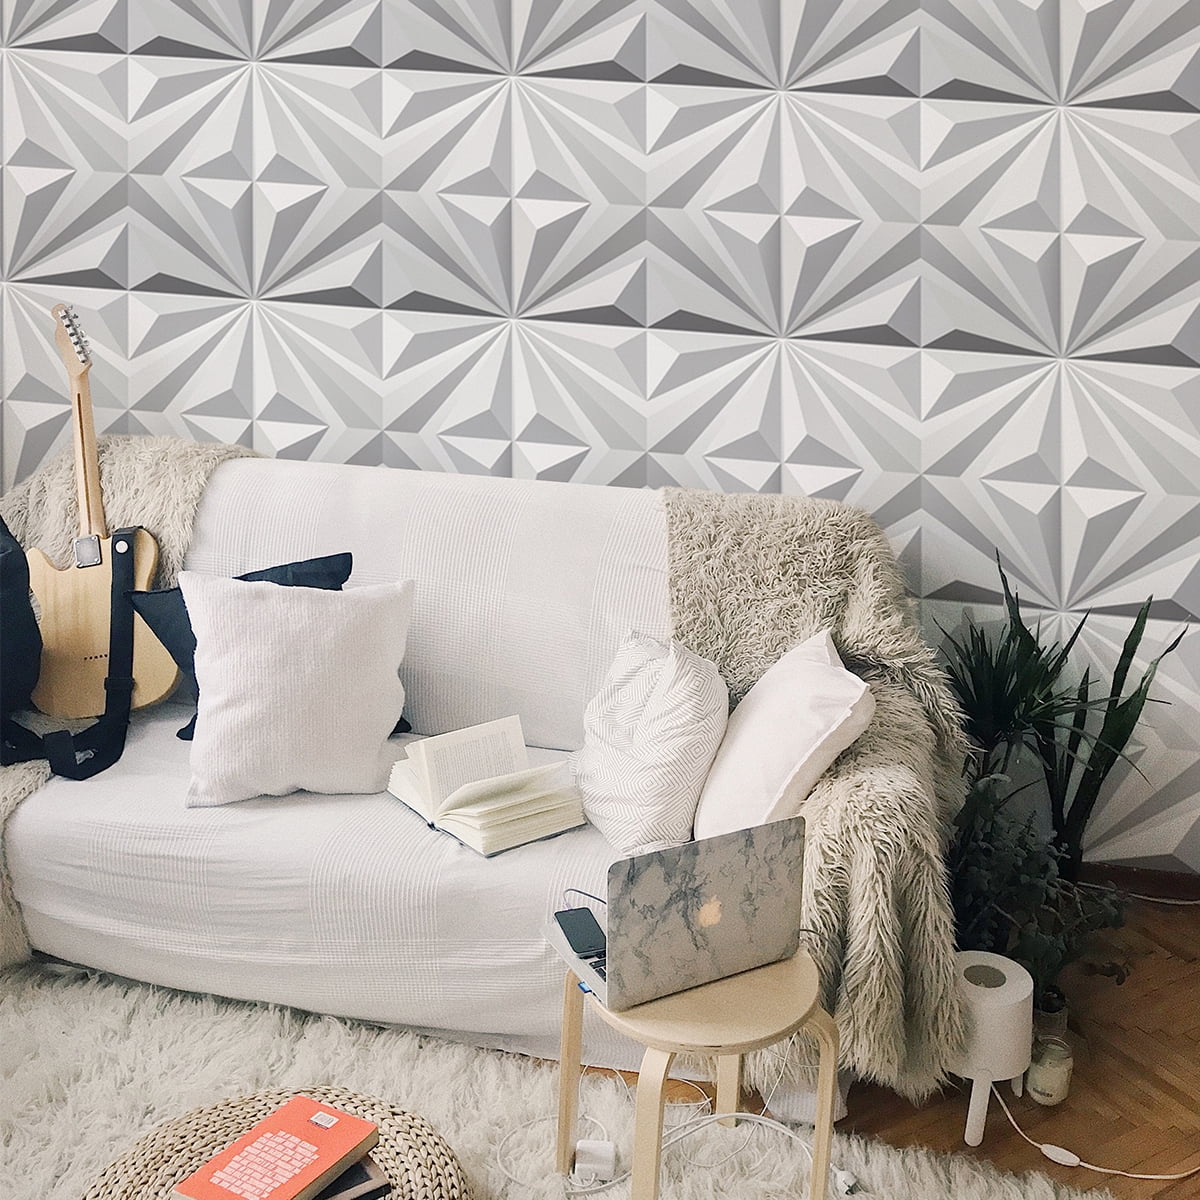 Art3dwallpanels 19.7 in. x 19.7 in. 32 Sq. ft. White PVC 3D Wall Panel Star Textured for Interior Wall Decor (Pack of 12-Tiles)